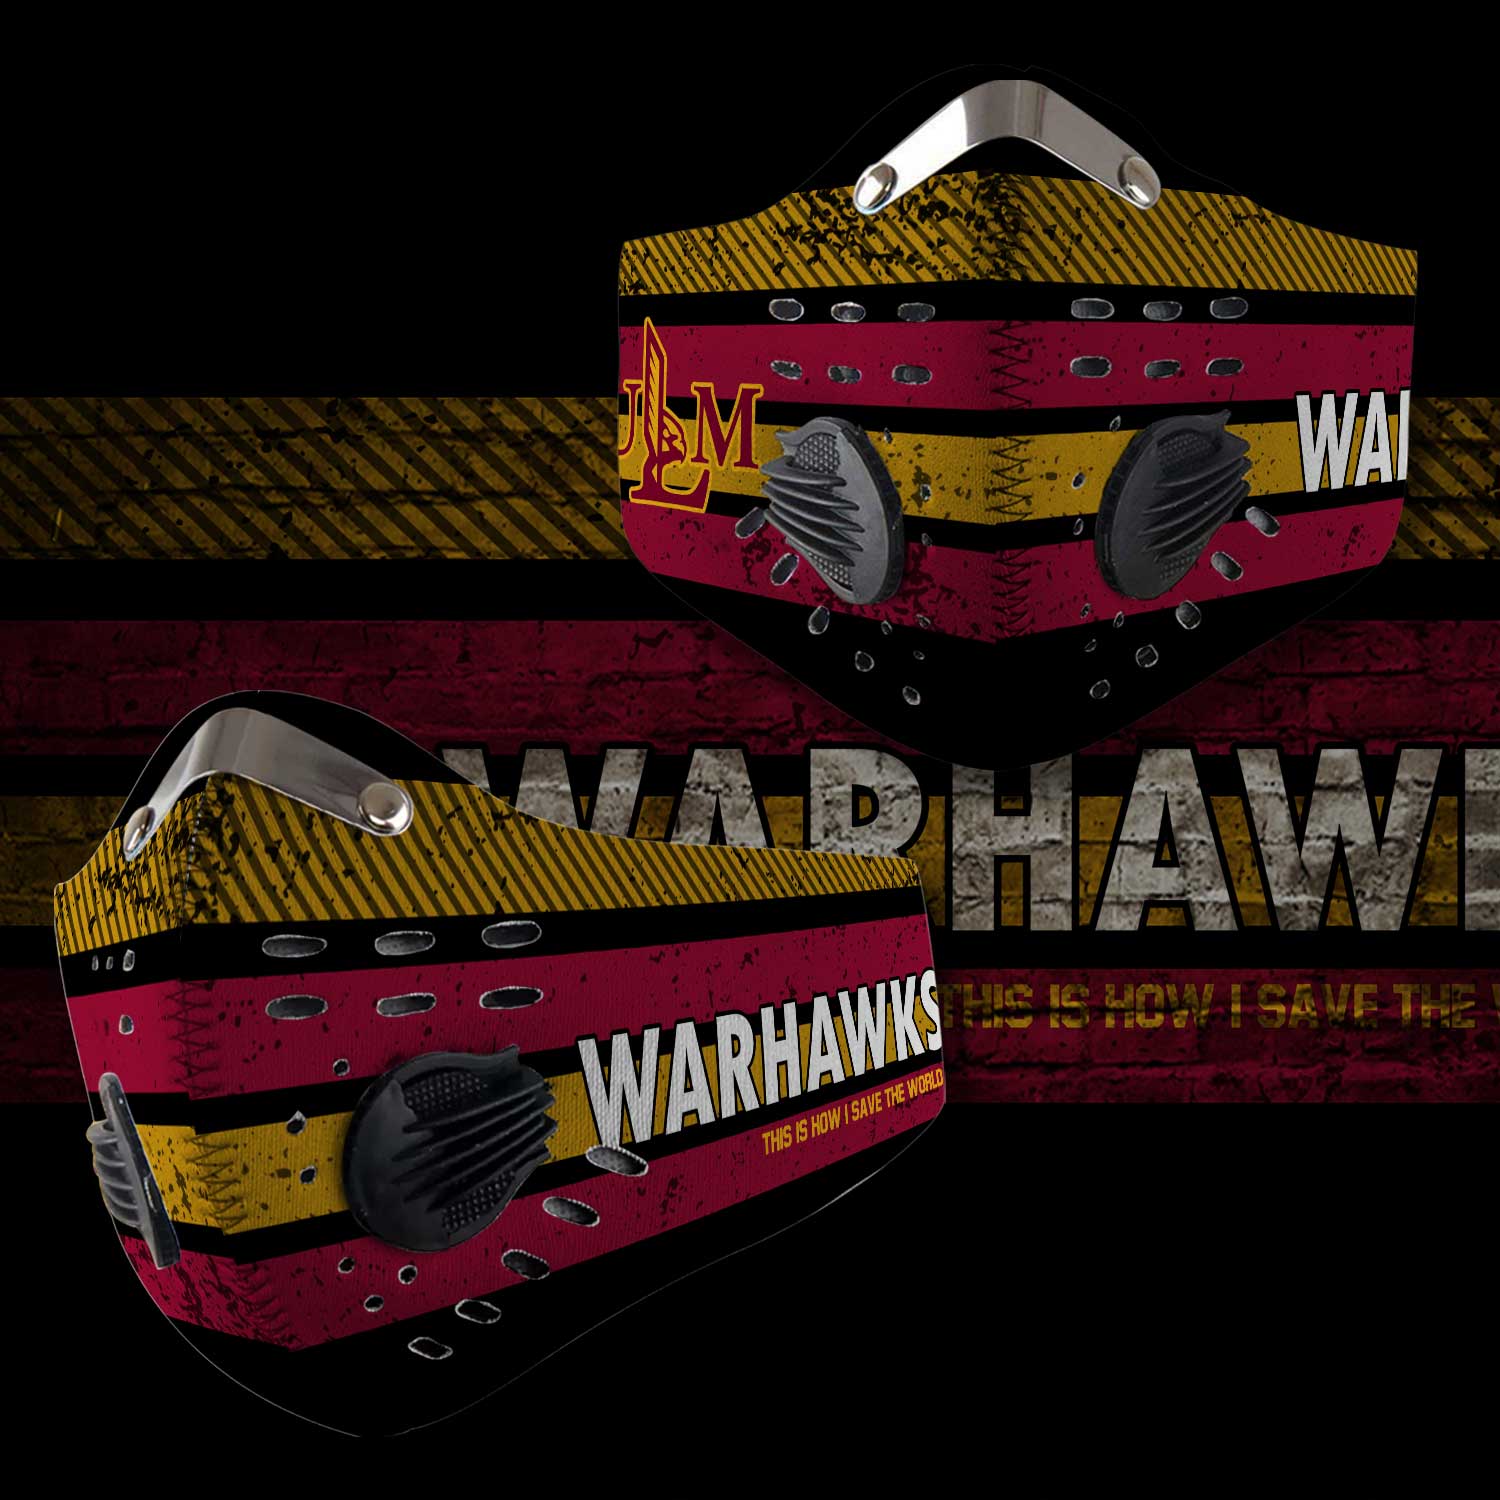 Louisiana monroe warhawks this is how i save the world face mask